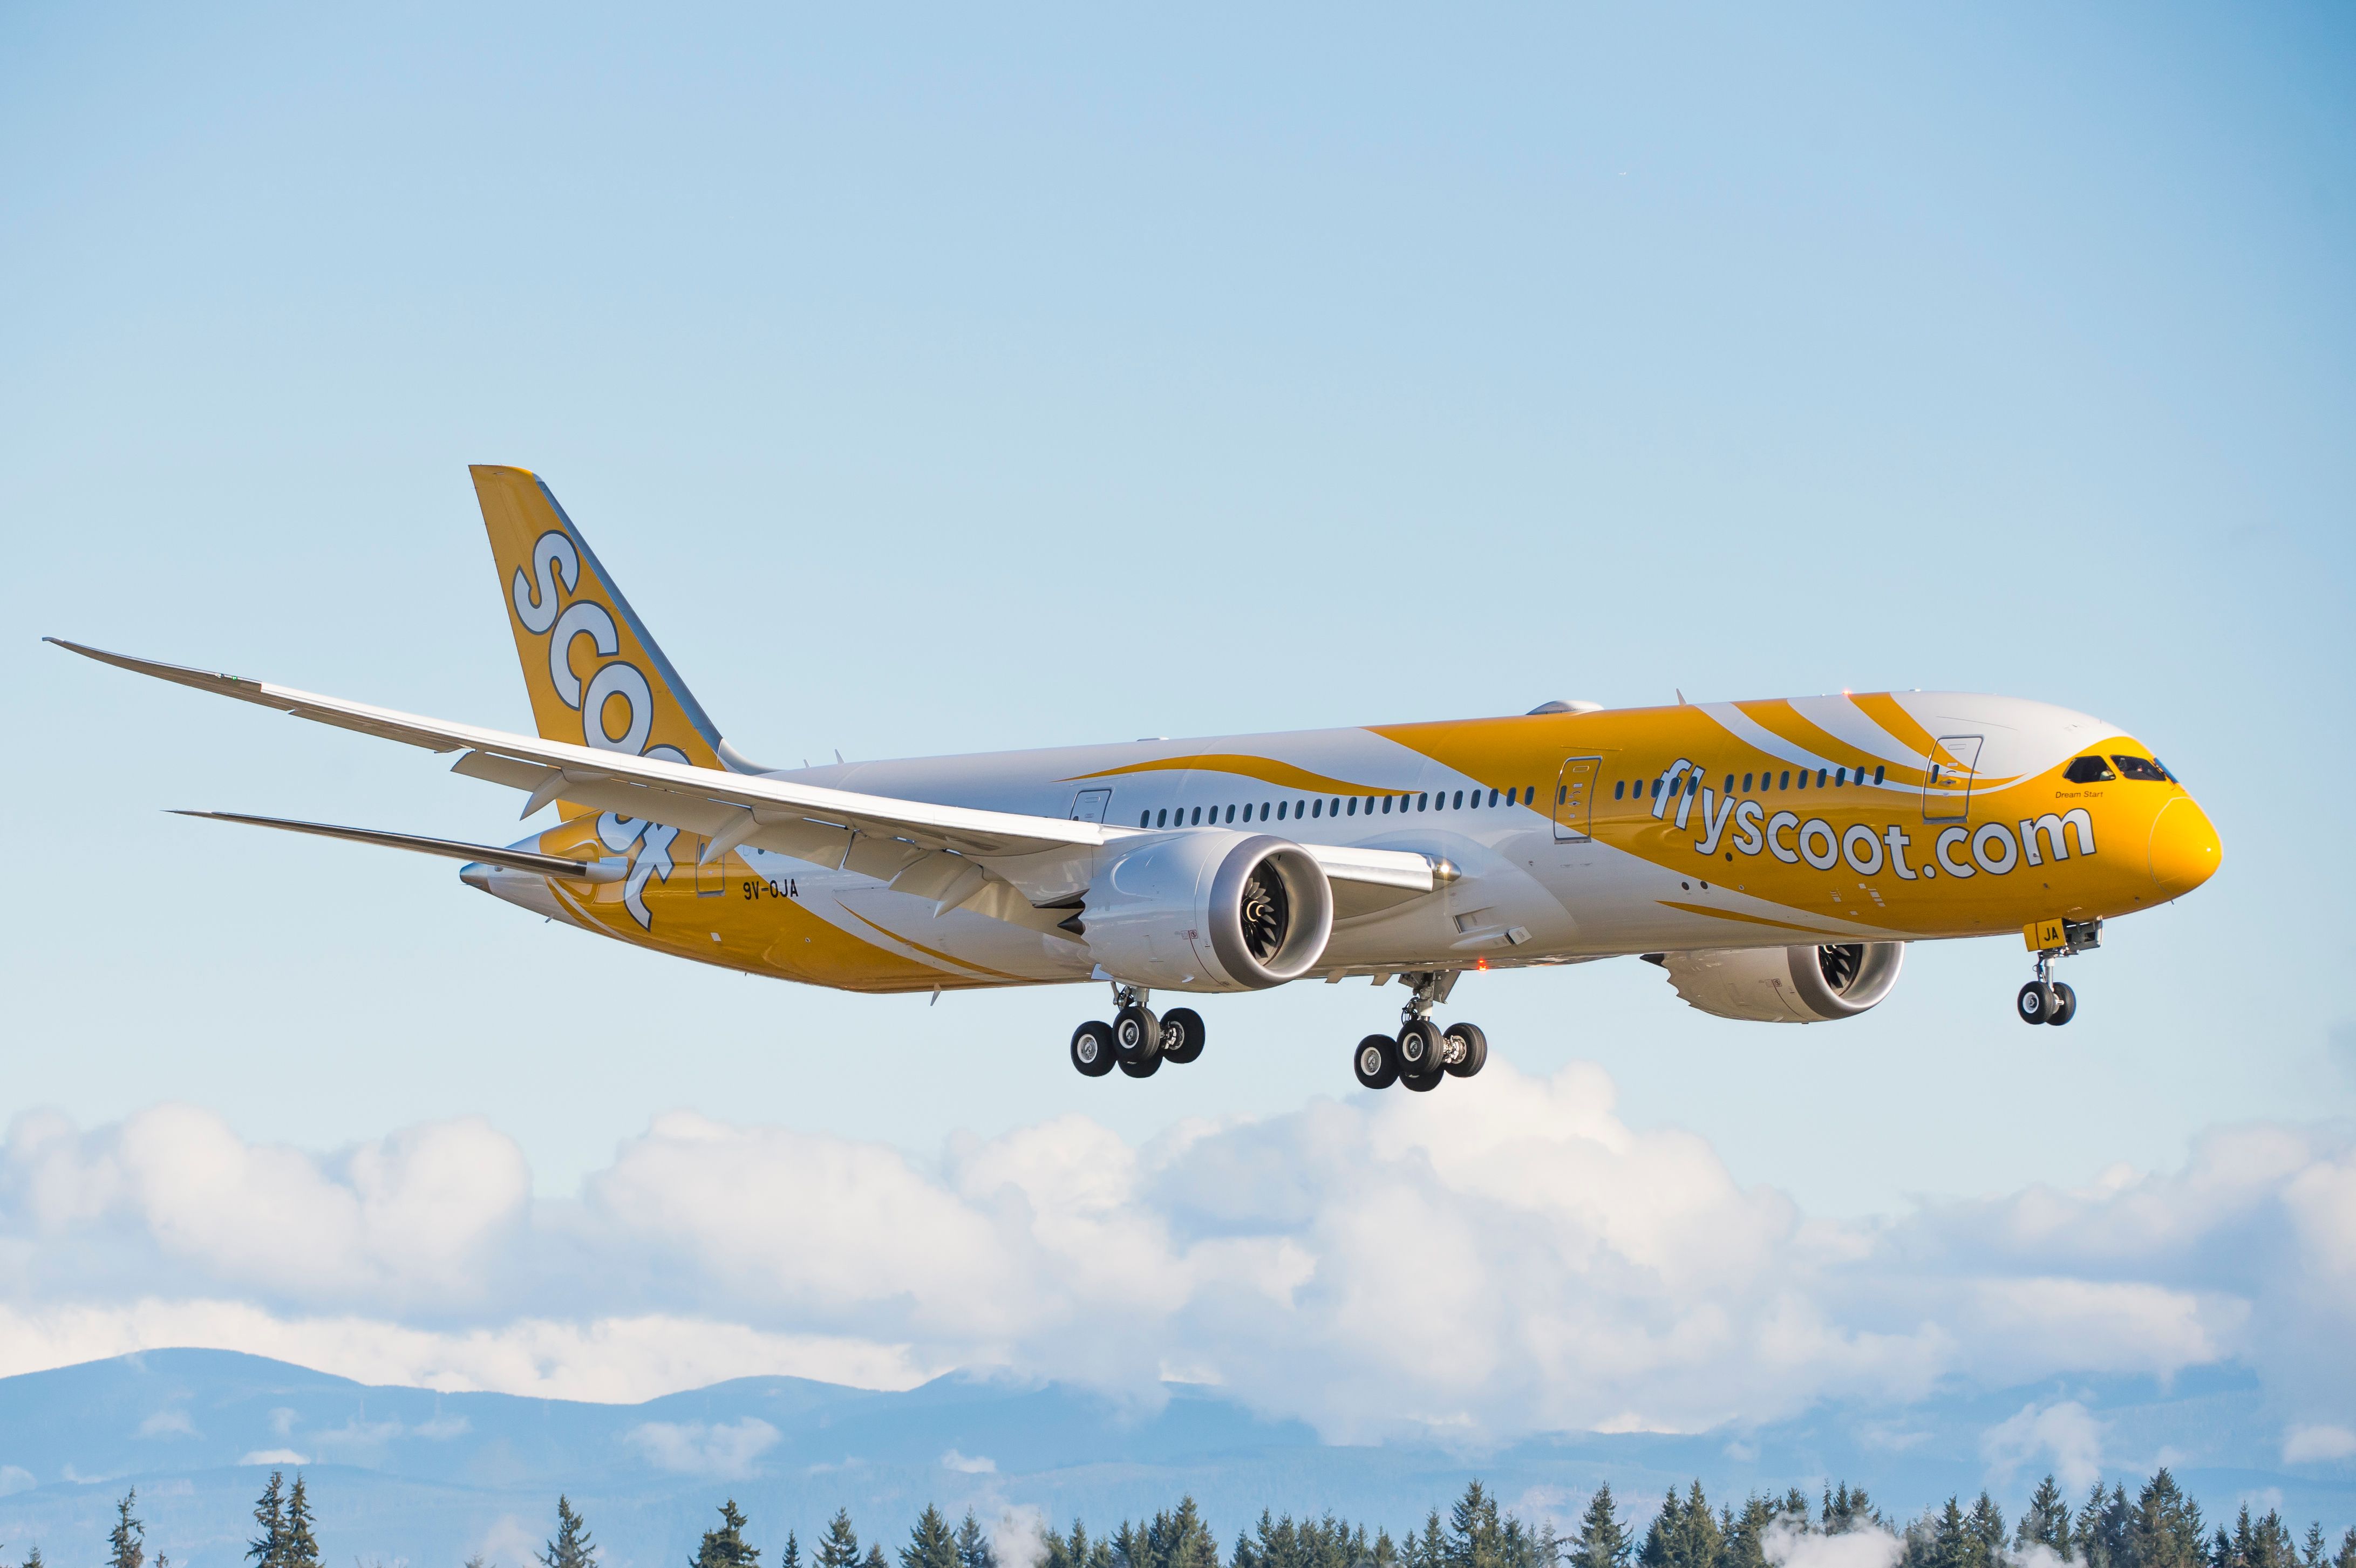 Scoot Boeing 787 coming in to land